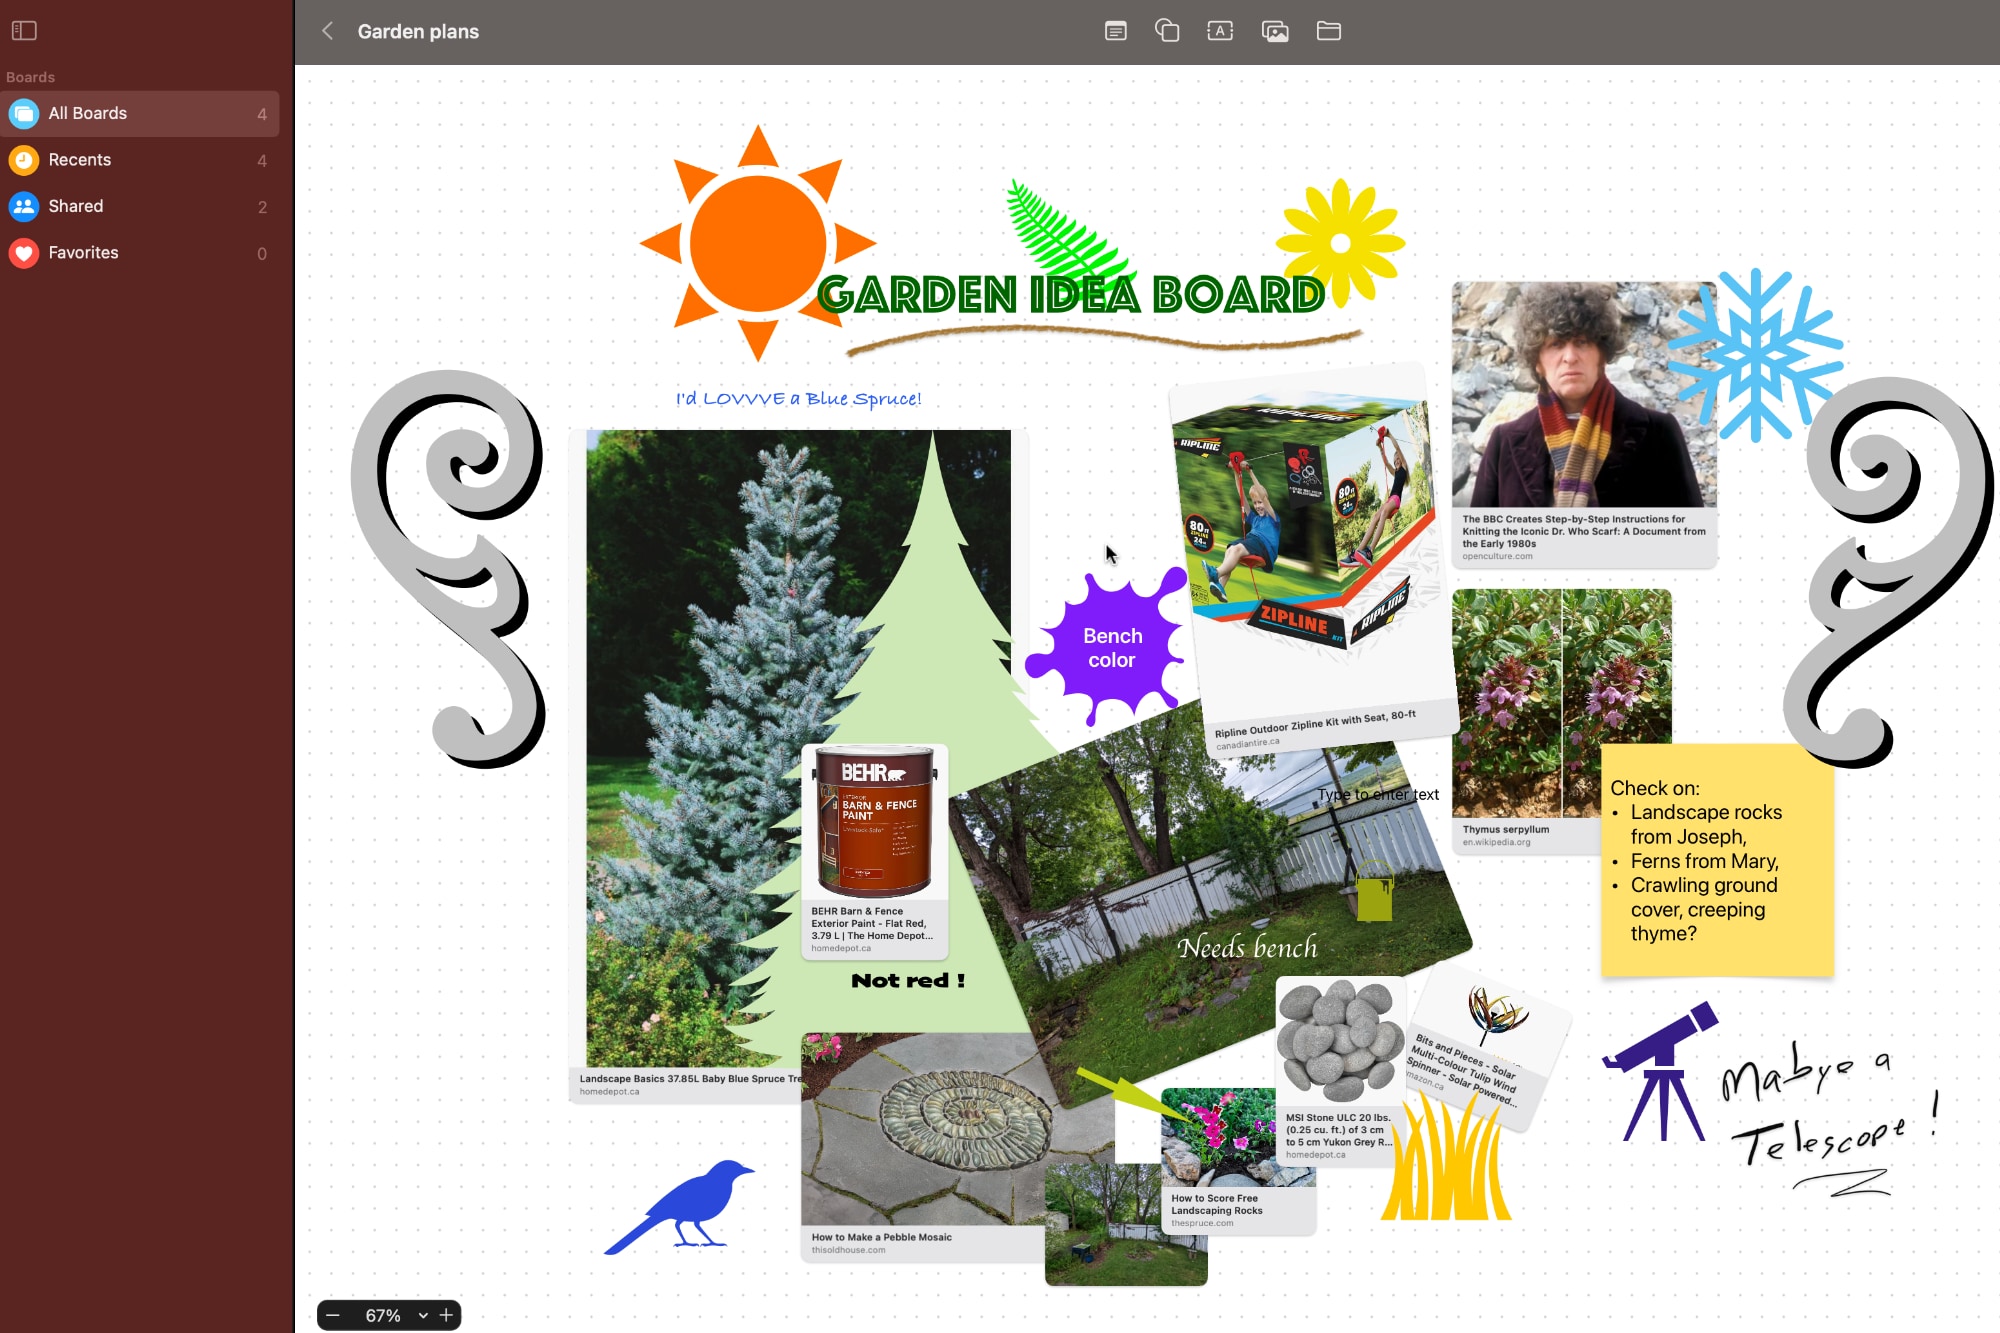 Here's my finished garden idea board tjhat I made with Apple Freeform